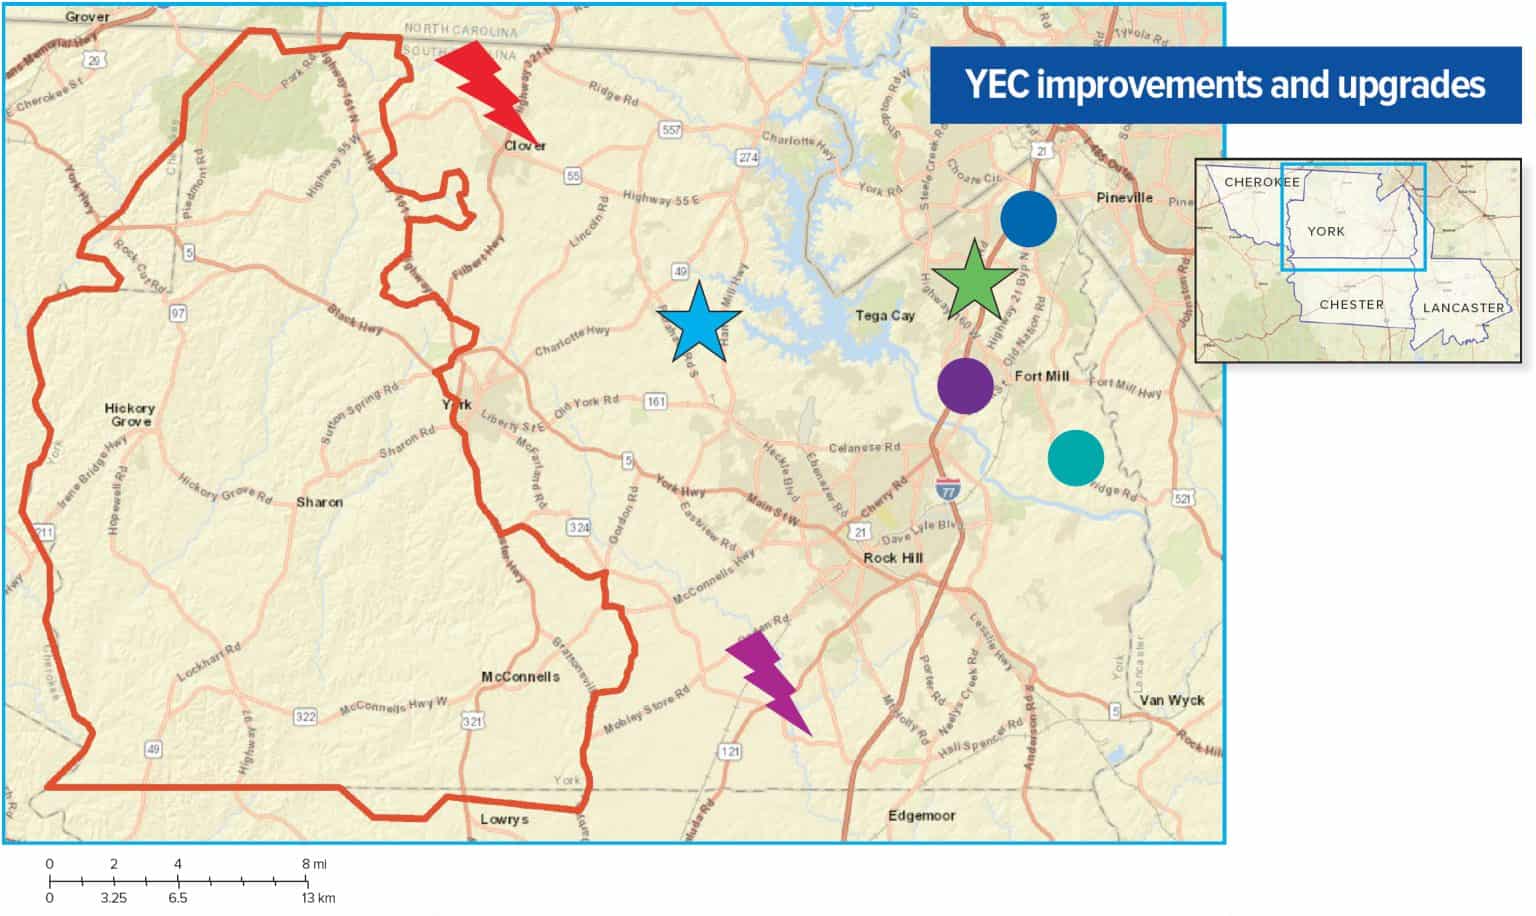 Showing map of YEC improvement areas